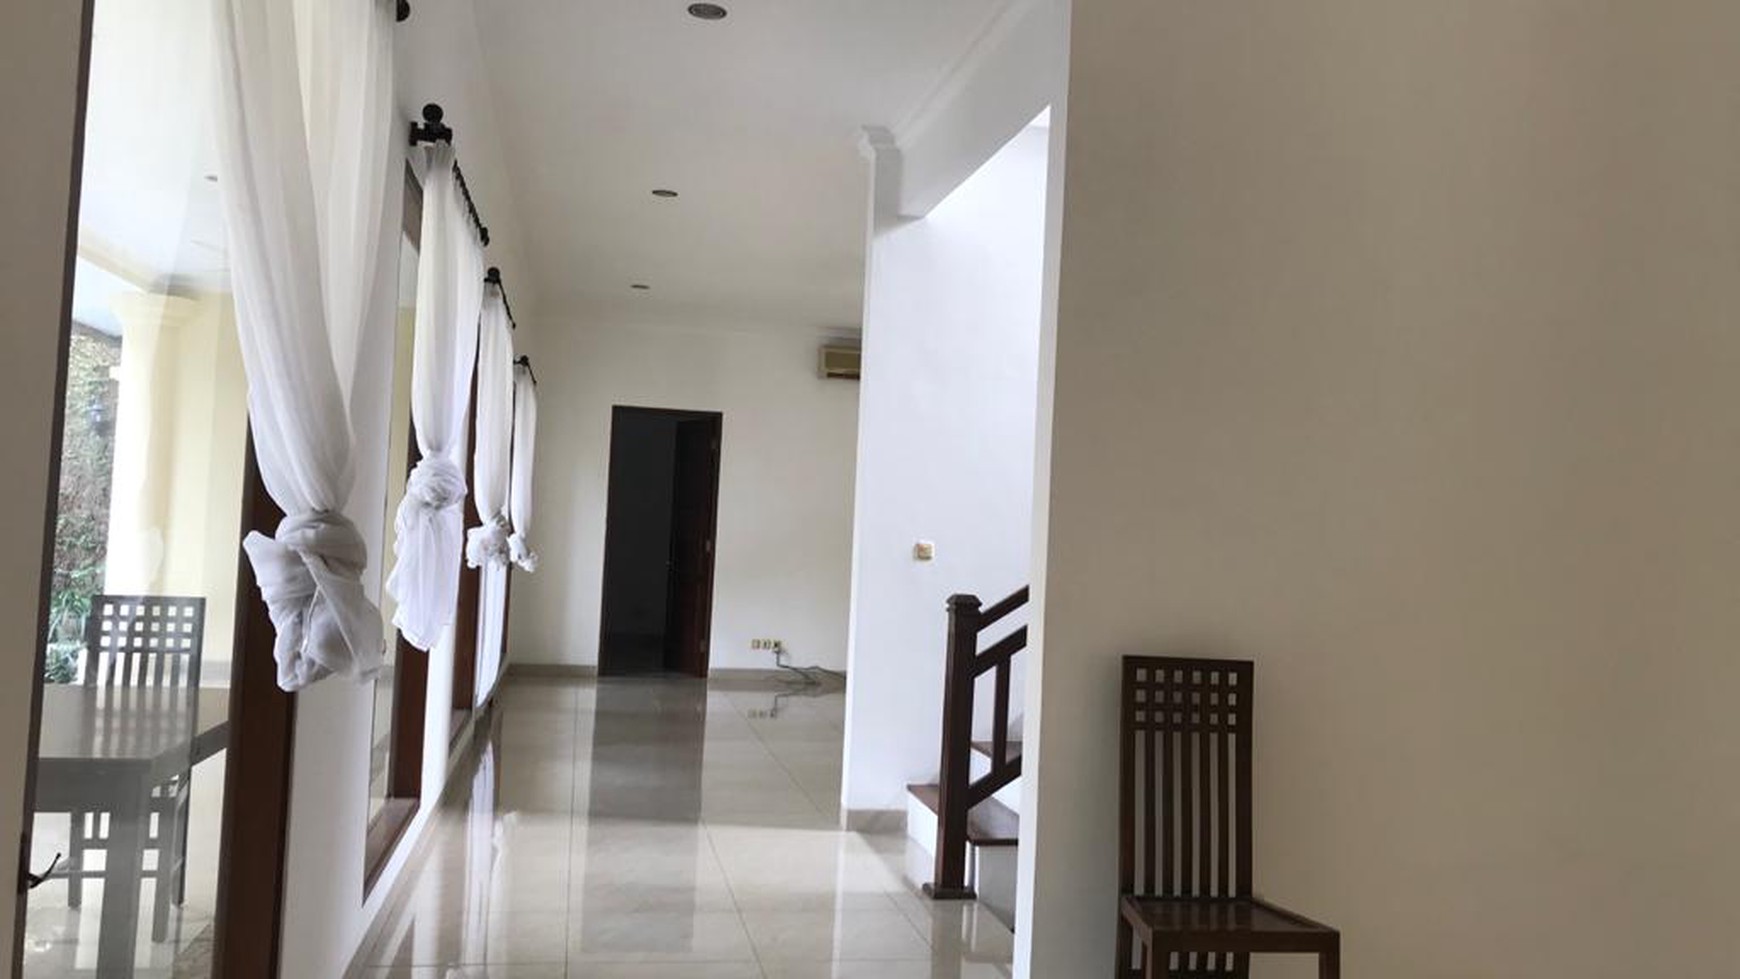 House in compound for rent with wide backyard located pejaten kemang